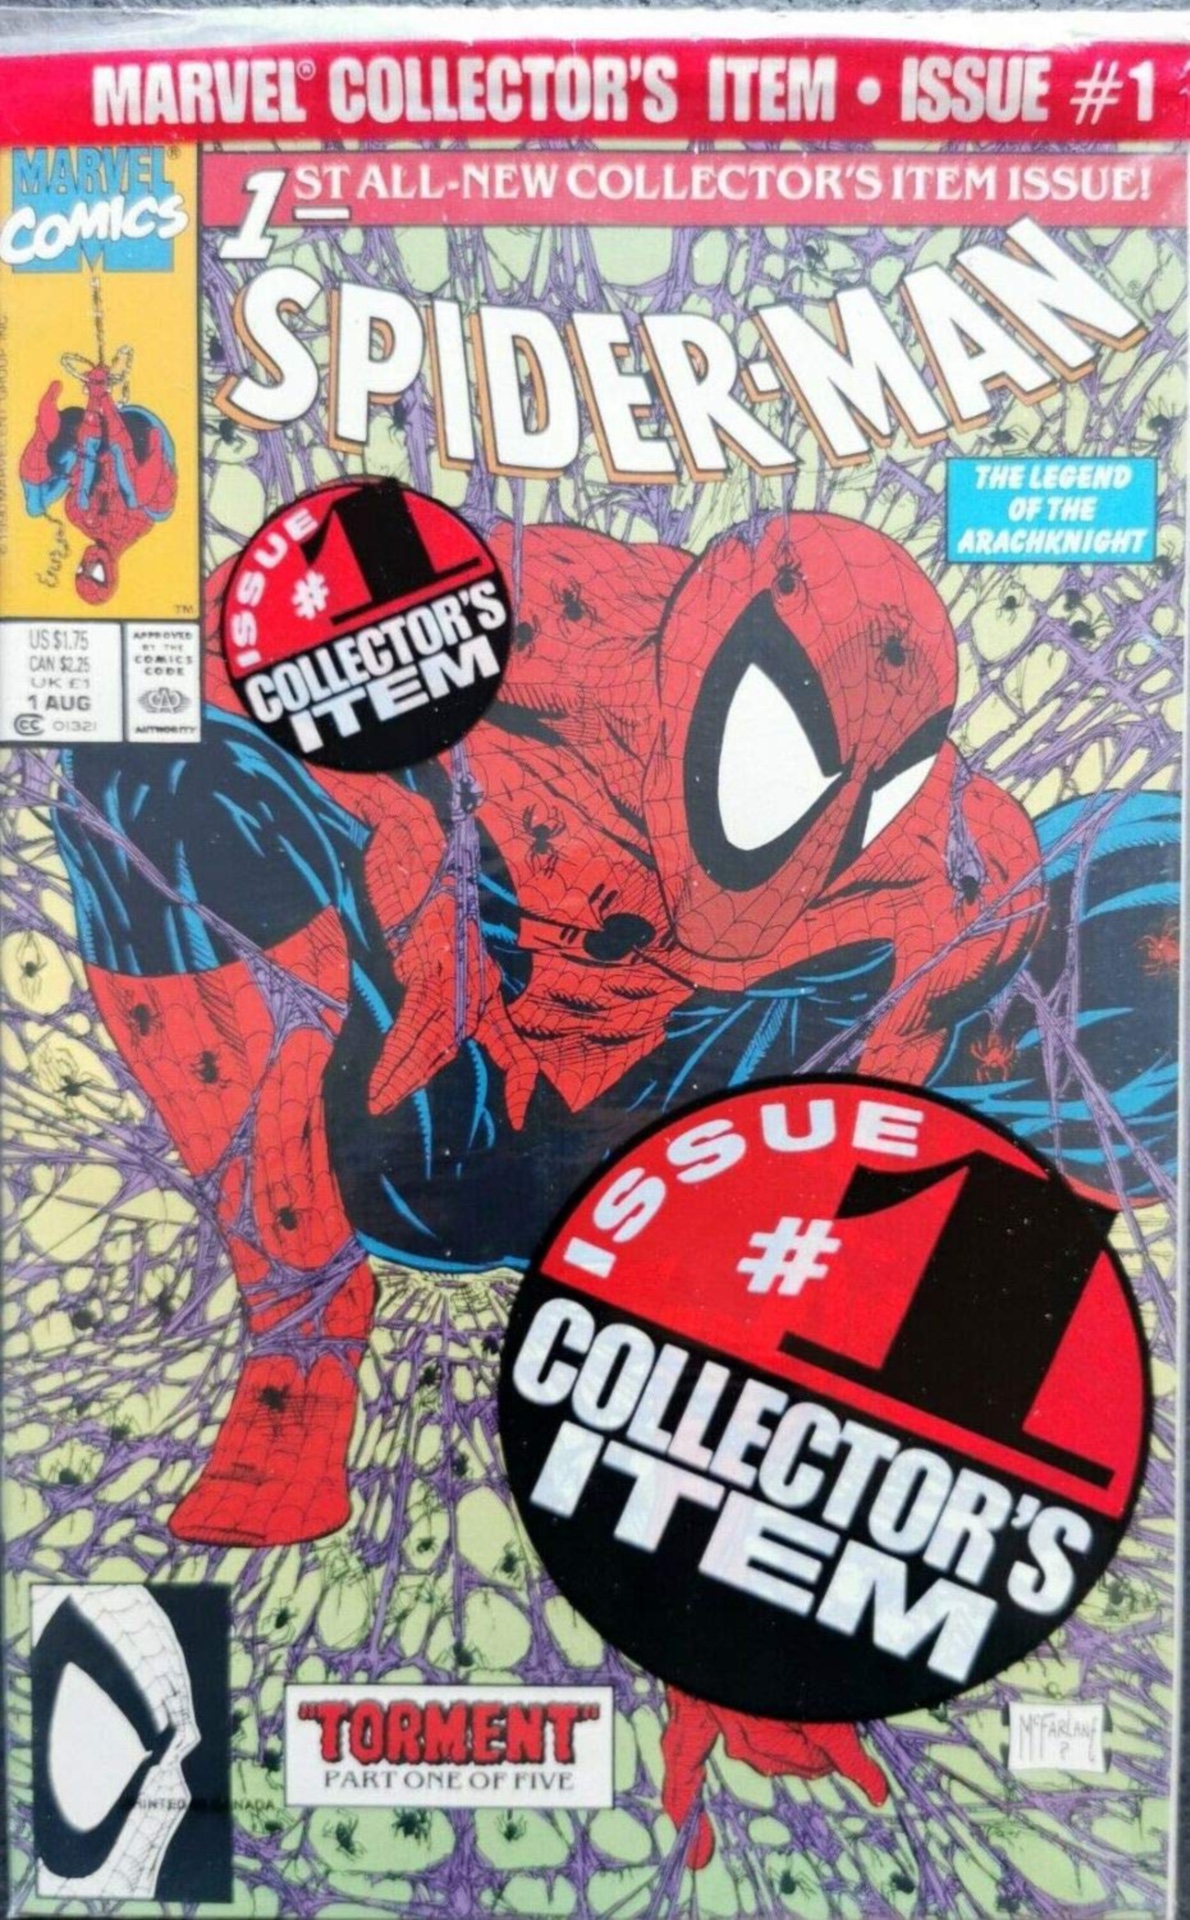 How Todd McFarlane's Spider-Man #1 changed comics culture and launched the  '90s | GamesRadar+